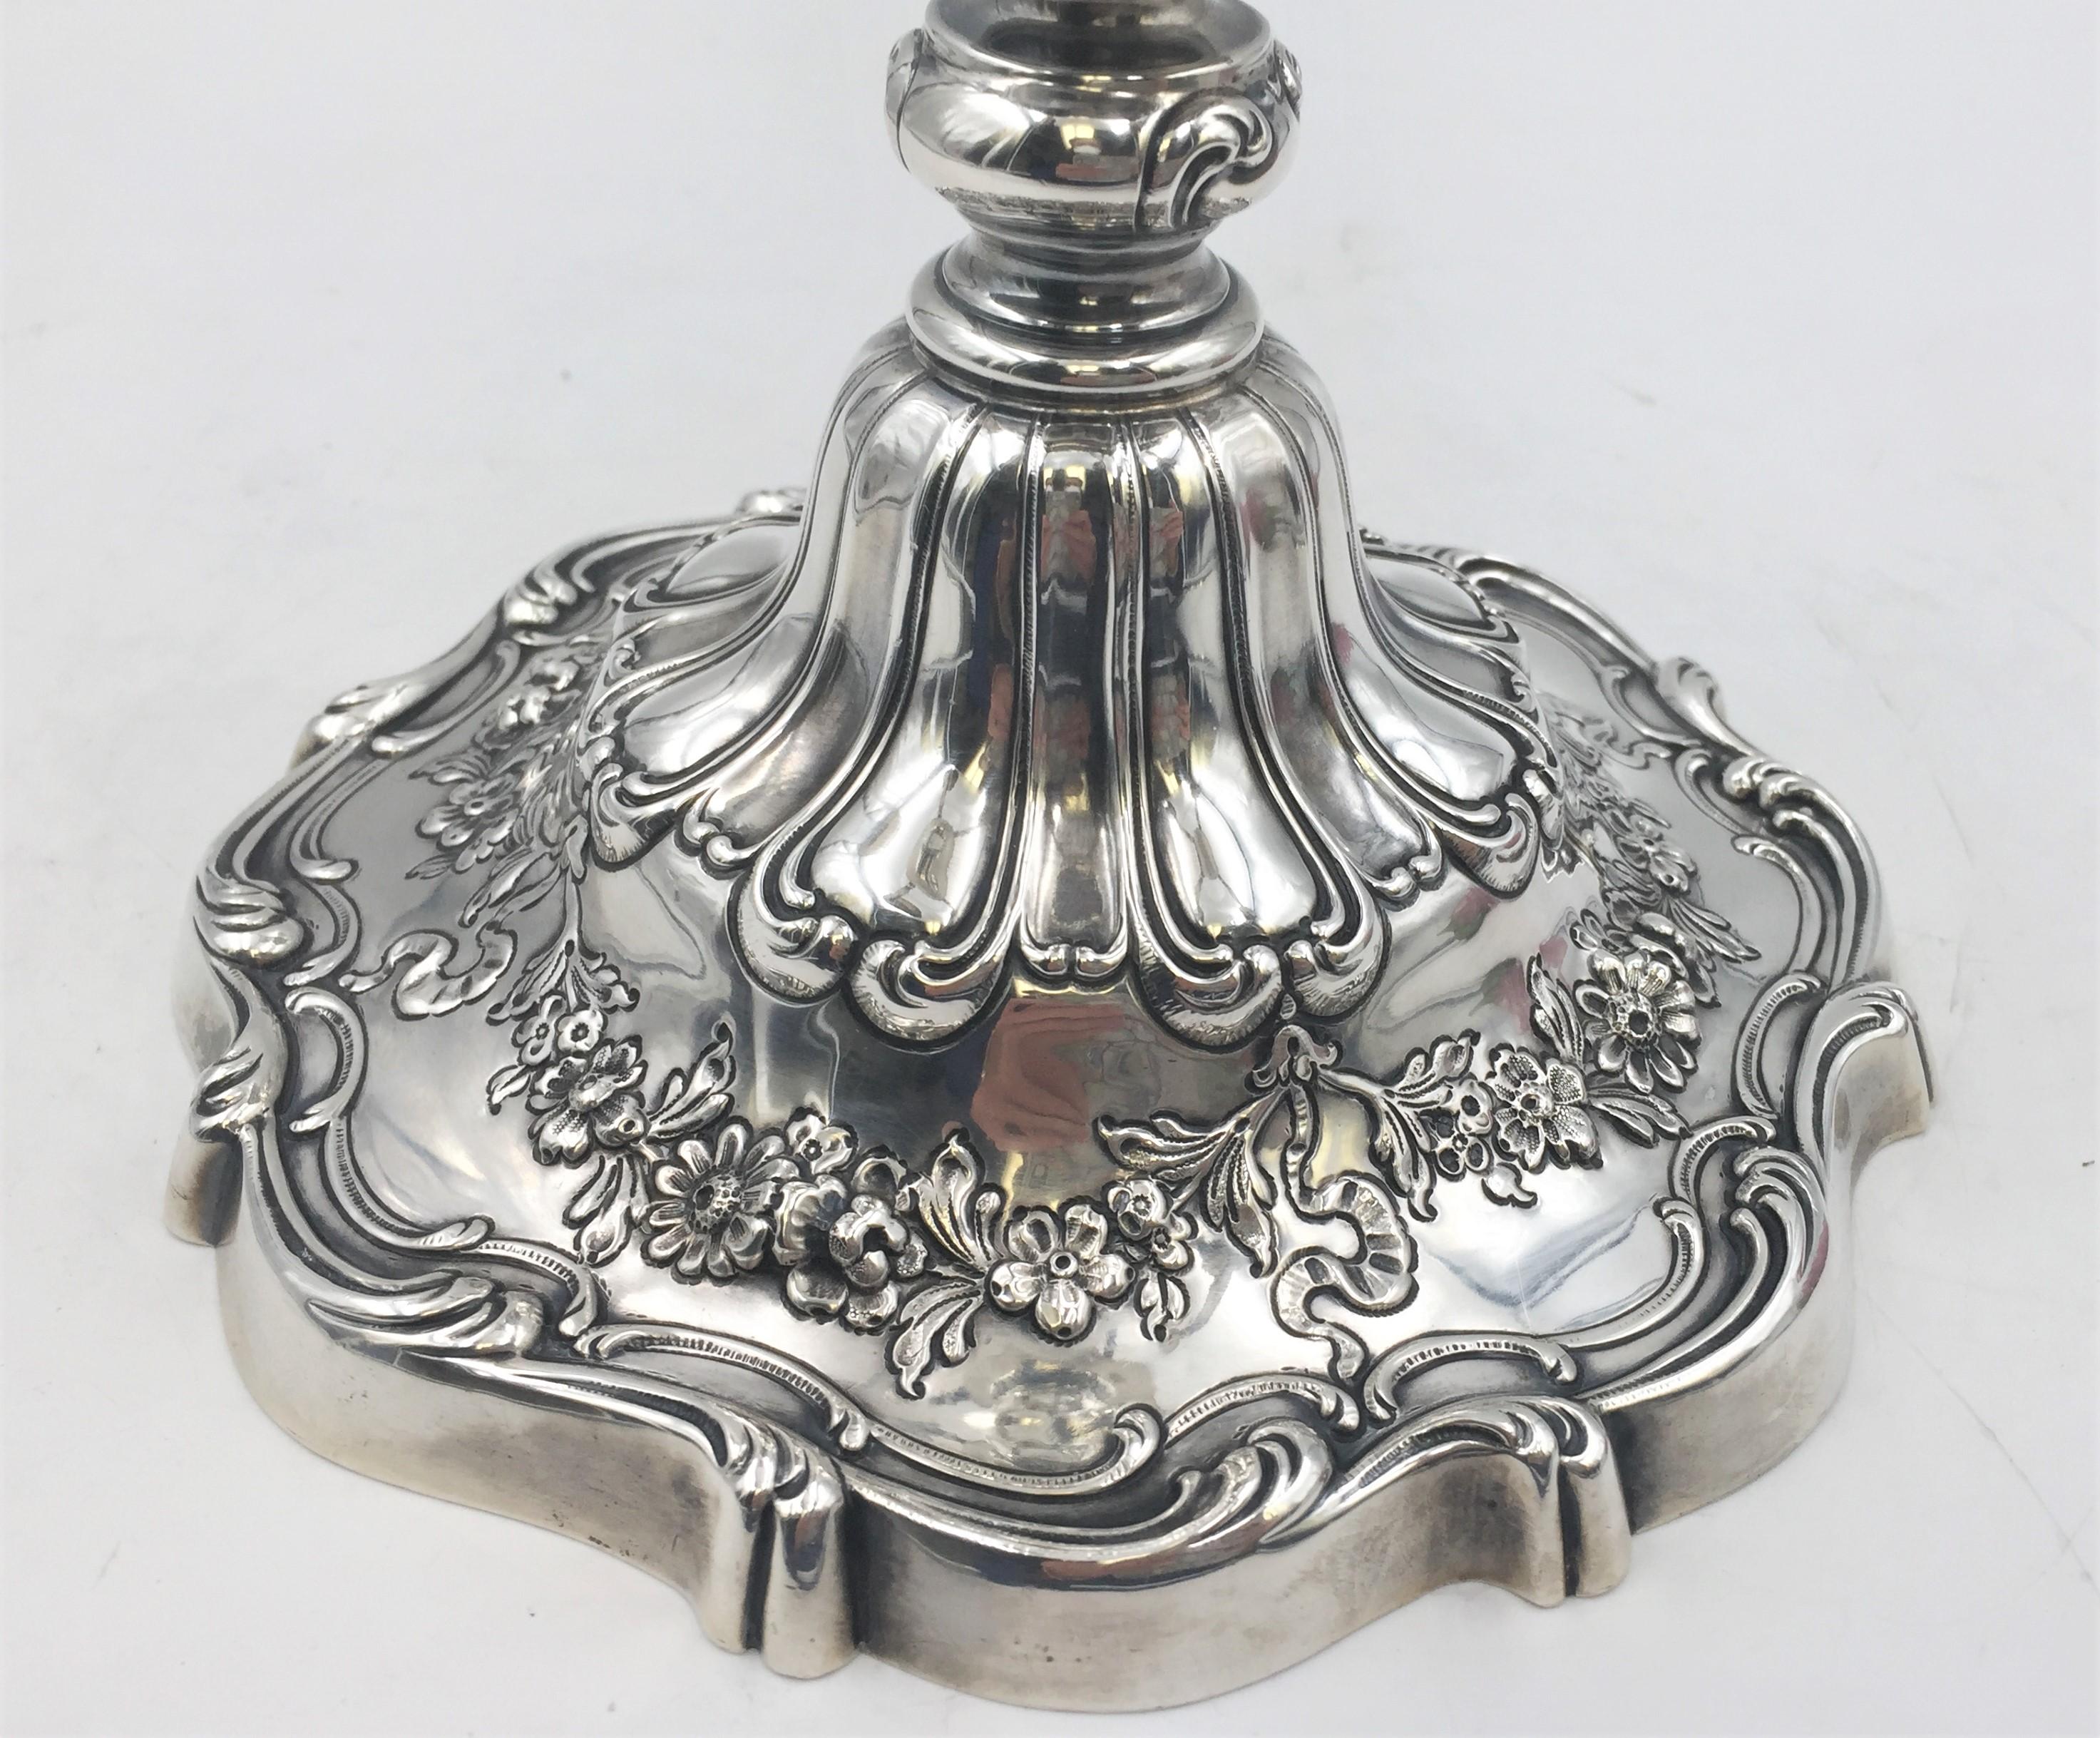 Gorham five-light candelabra in sterling silver in desirable Chantilly pattern with ornate floral and scroll decoration and five removable bobeches from 1959. Weighted and measuring 17'' from arm to arm and 16'' in height. Bearing hallmarks as